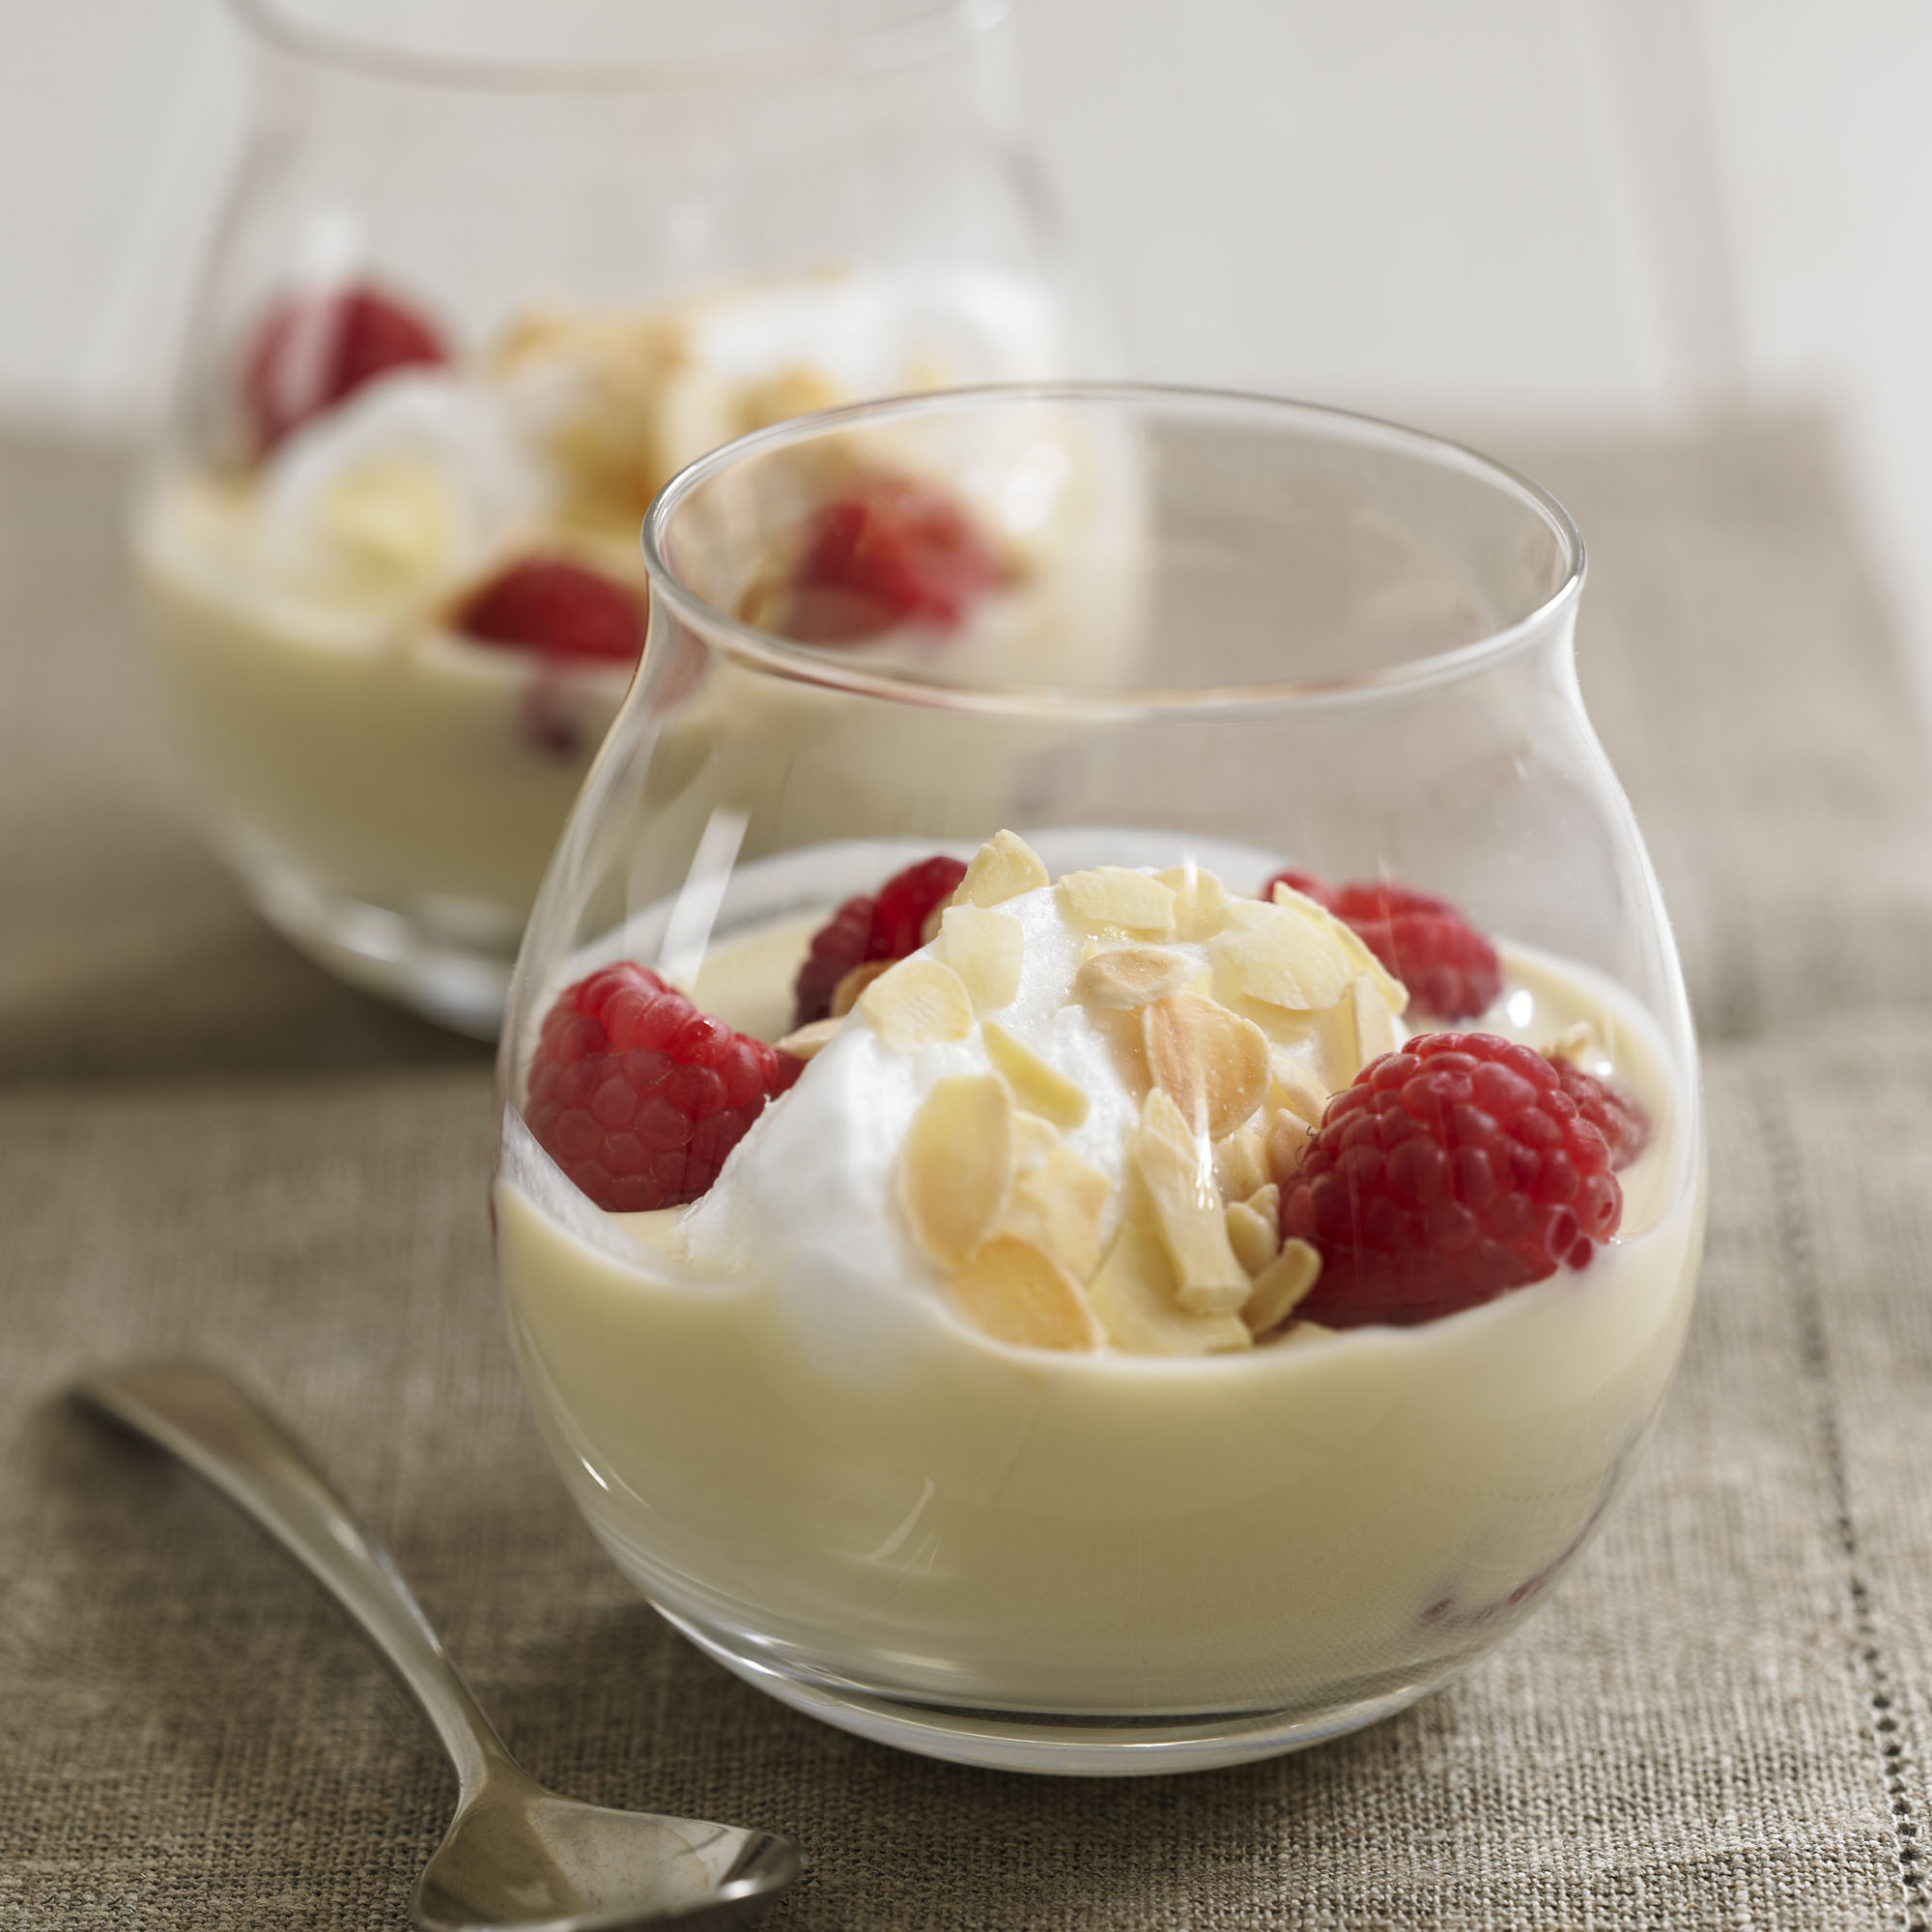 Floating Islands Dessert
 Rosewater Floating Islands with Framboise Custard and